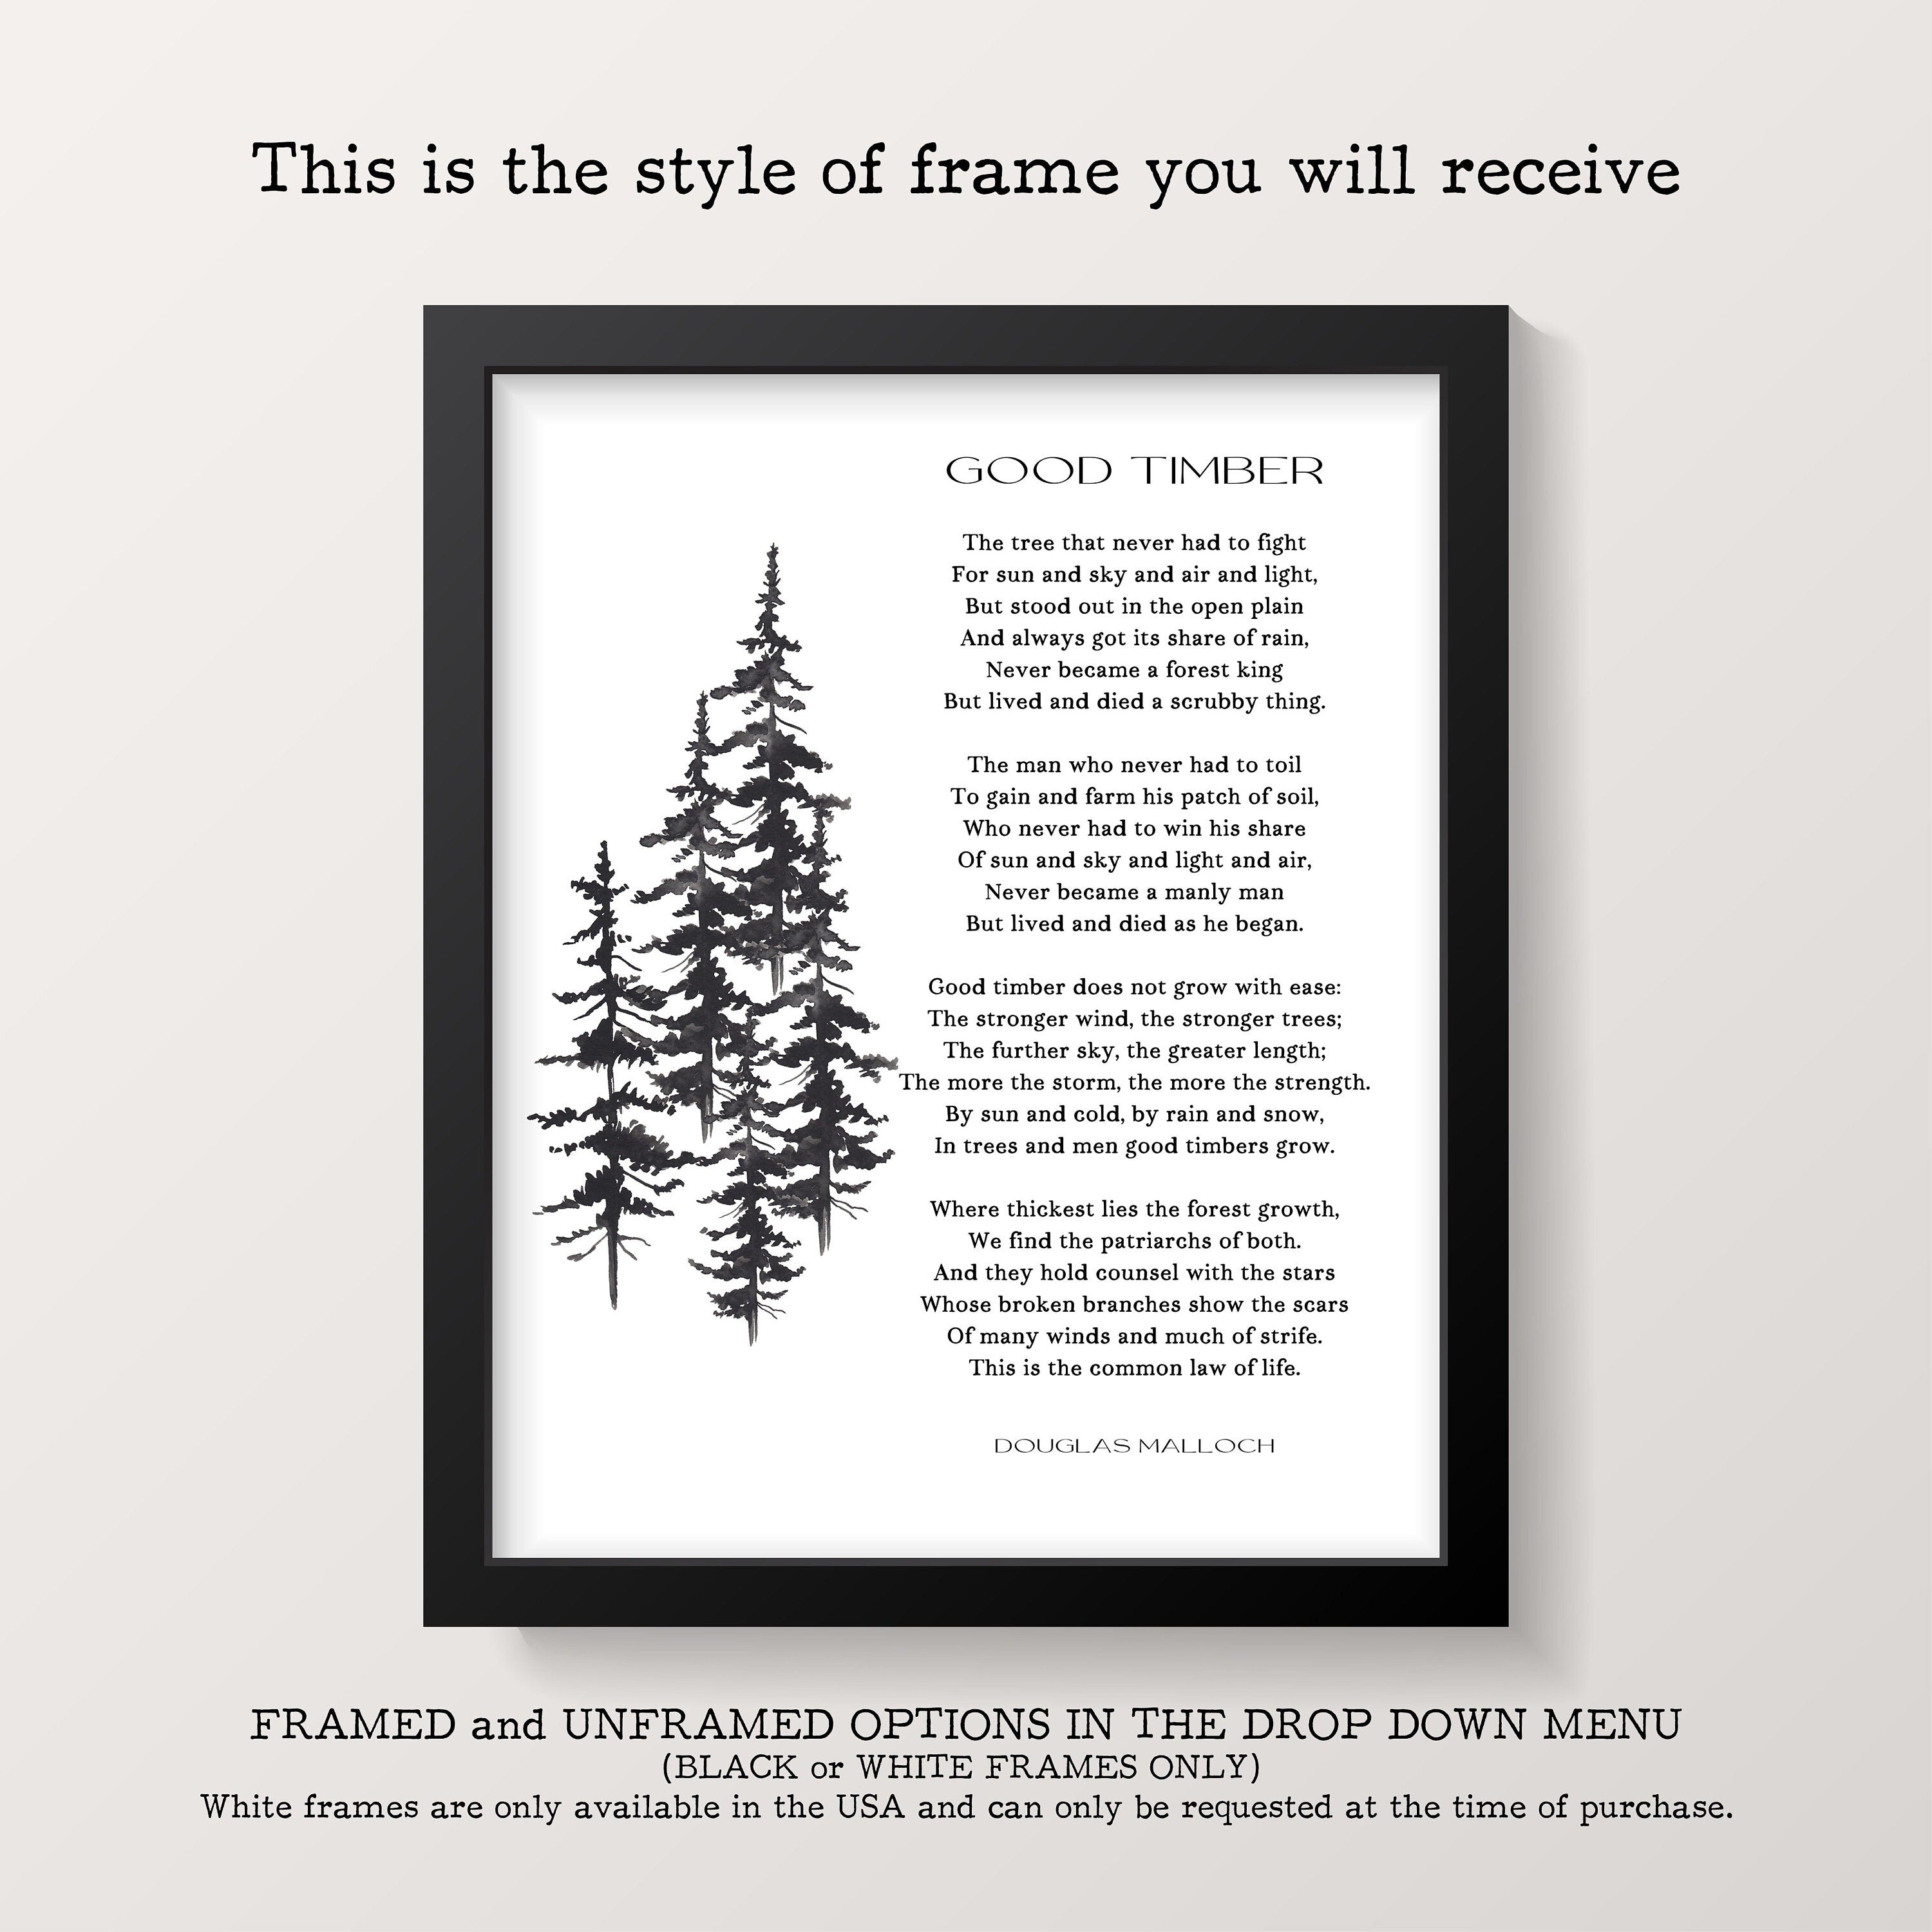 Robert Frost Stopping by the Woods on a Snowy Evening Unframed or Framed Wall Art Print in Black & White for Home Wall Decor